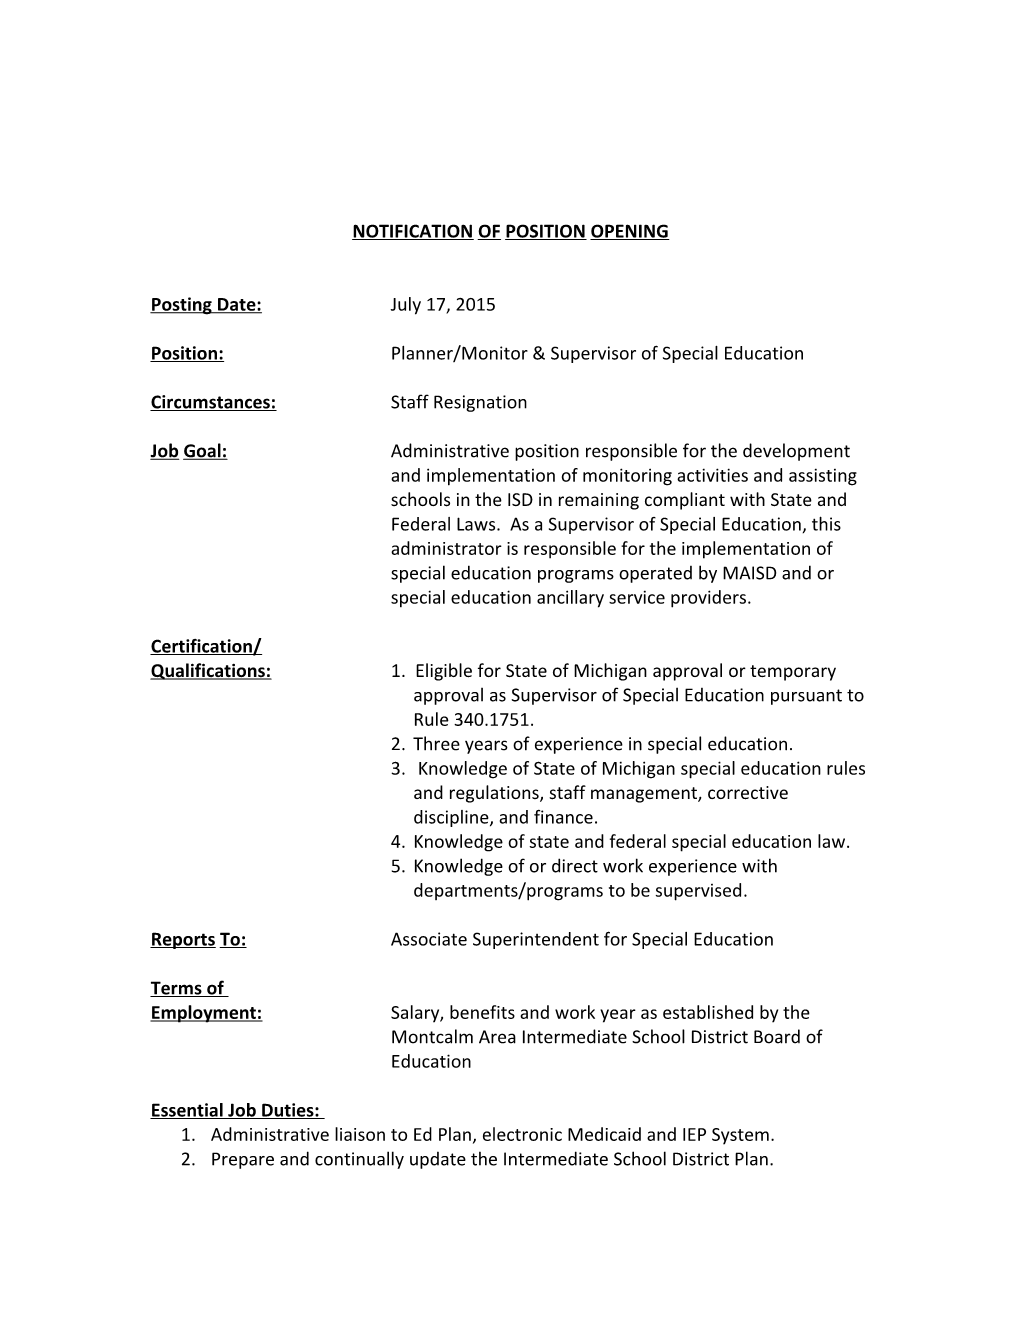 Notification of Position Opening